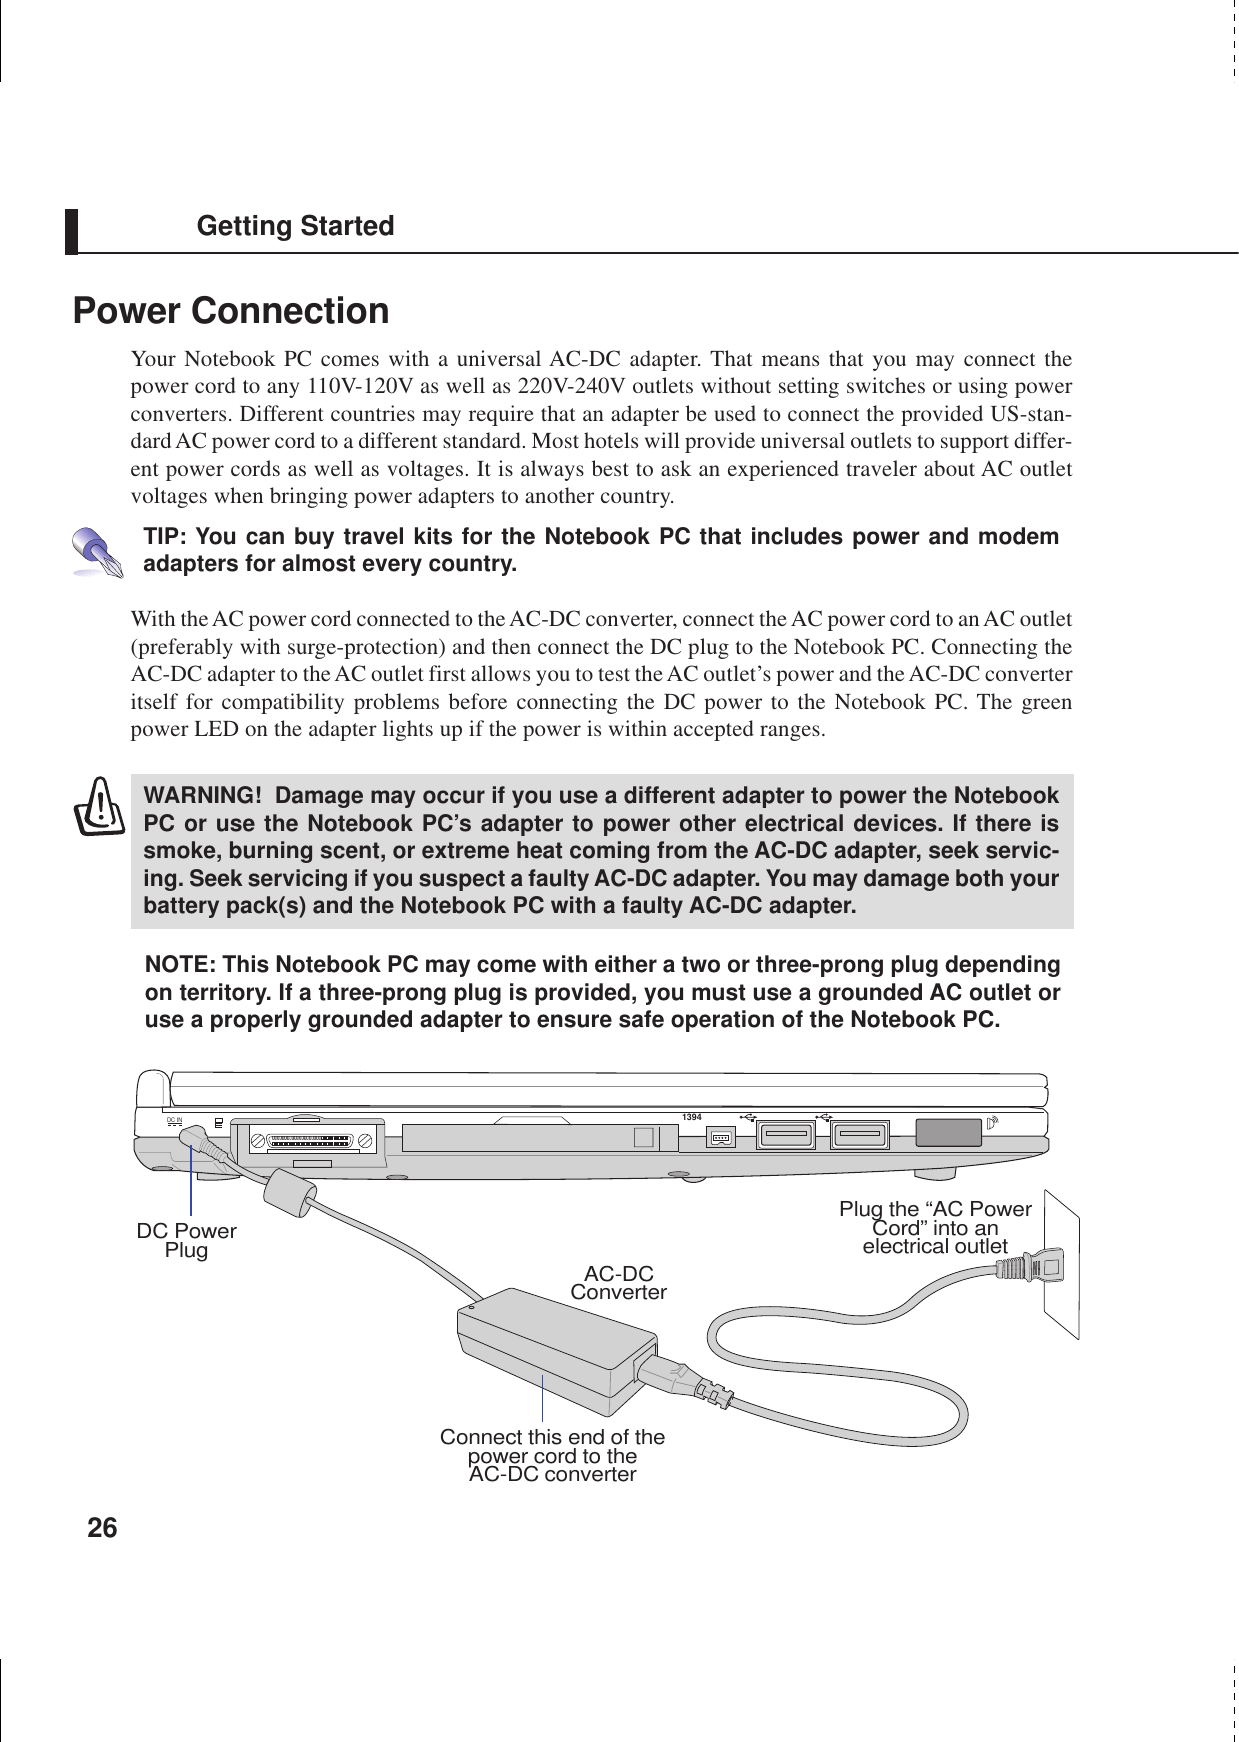 26Getting StartedPower ConnectionYour Notebook PC comes with a universal AC-DC adapter. That means that you may connect thepower cord to any 110V-120V as well as 220V-240V outlets without setting switches or using powerconverters. Different countries may require that an adapter be used to connect the provided US-stan-dard AC power cord to a different standard. Most hotels will provide universal outlets to support differ-ent power cords as well as voltages. It is always best to ask an experienced traveler about AC outletvoltages when bringing power adapters to another country.TIP: You can buy travel kits for the Notebook PC that includes power and modemadapters for almost every country.With the AC power cord connected to the AC-DC converter, connect the AC power cord to an AC outlet(preferably with surge-protection) and then connect the DC plug to the Notebook PC. Connecting theAC-DC adapter to the AC outlet first allows you to test the AC outlet’s power and the AC-DC converteritself for compatibility problems before connecting the DC power to the Notebook PC. The greenpower LED on the adapter lights up if the power is within accepted ranges.WARNING!  Damage may occur if you use a different adapter to power the NotebookPC or use the Notebook PC’s adapter to power other electrical devices. If there issmoke, burning scent, or extreme heat coming from the AC-DC adapter, seek servic-ing. Seek servicing if you suspect a faulty AC-DC adapter. You may damage both yourbattery pack(s) and the Notebook PC with a faulty AC-DC adapter.NOTE: This Notebook PC may come with either a two or three-prong plug dependingon territory. If a three-prong plug is provided, you must use a grounded AC outlet oruse a properly grounded adapter to ensure safe operation of the Notebook PC.Connect this end of thepower cord to theAC-DC converterPlug the “AC PowerCord” into anelectrical outletAC-DCConverterDC PowerPlugDC IN1394